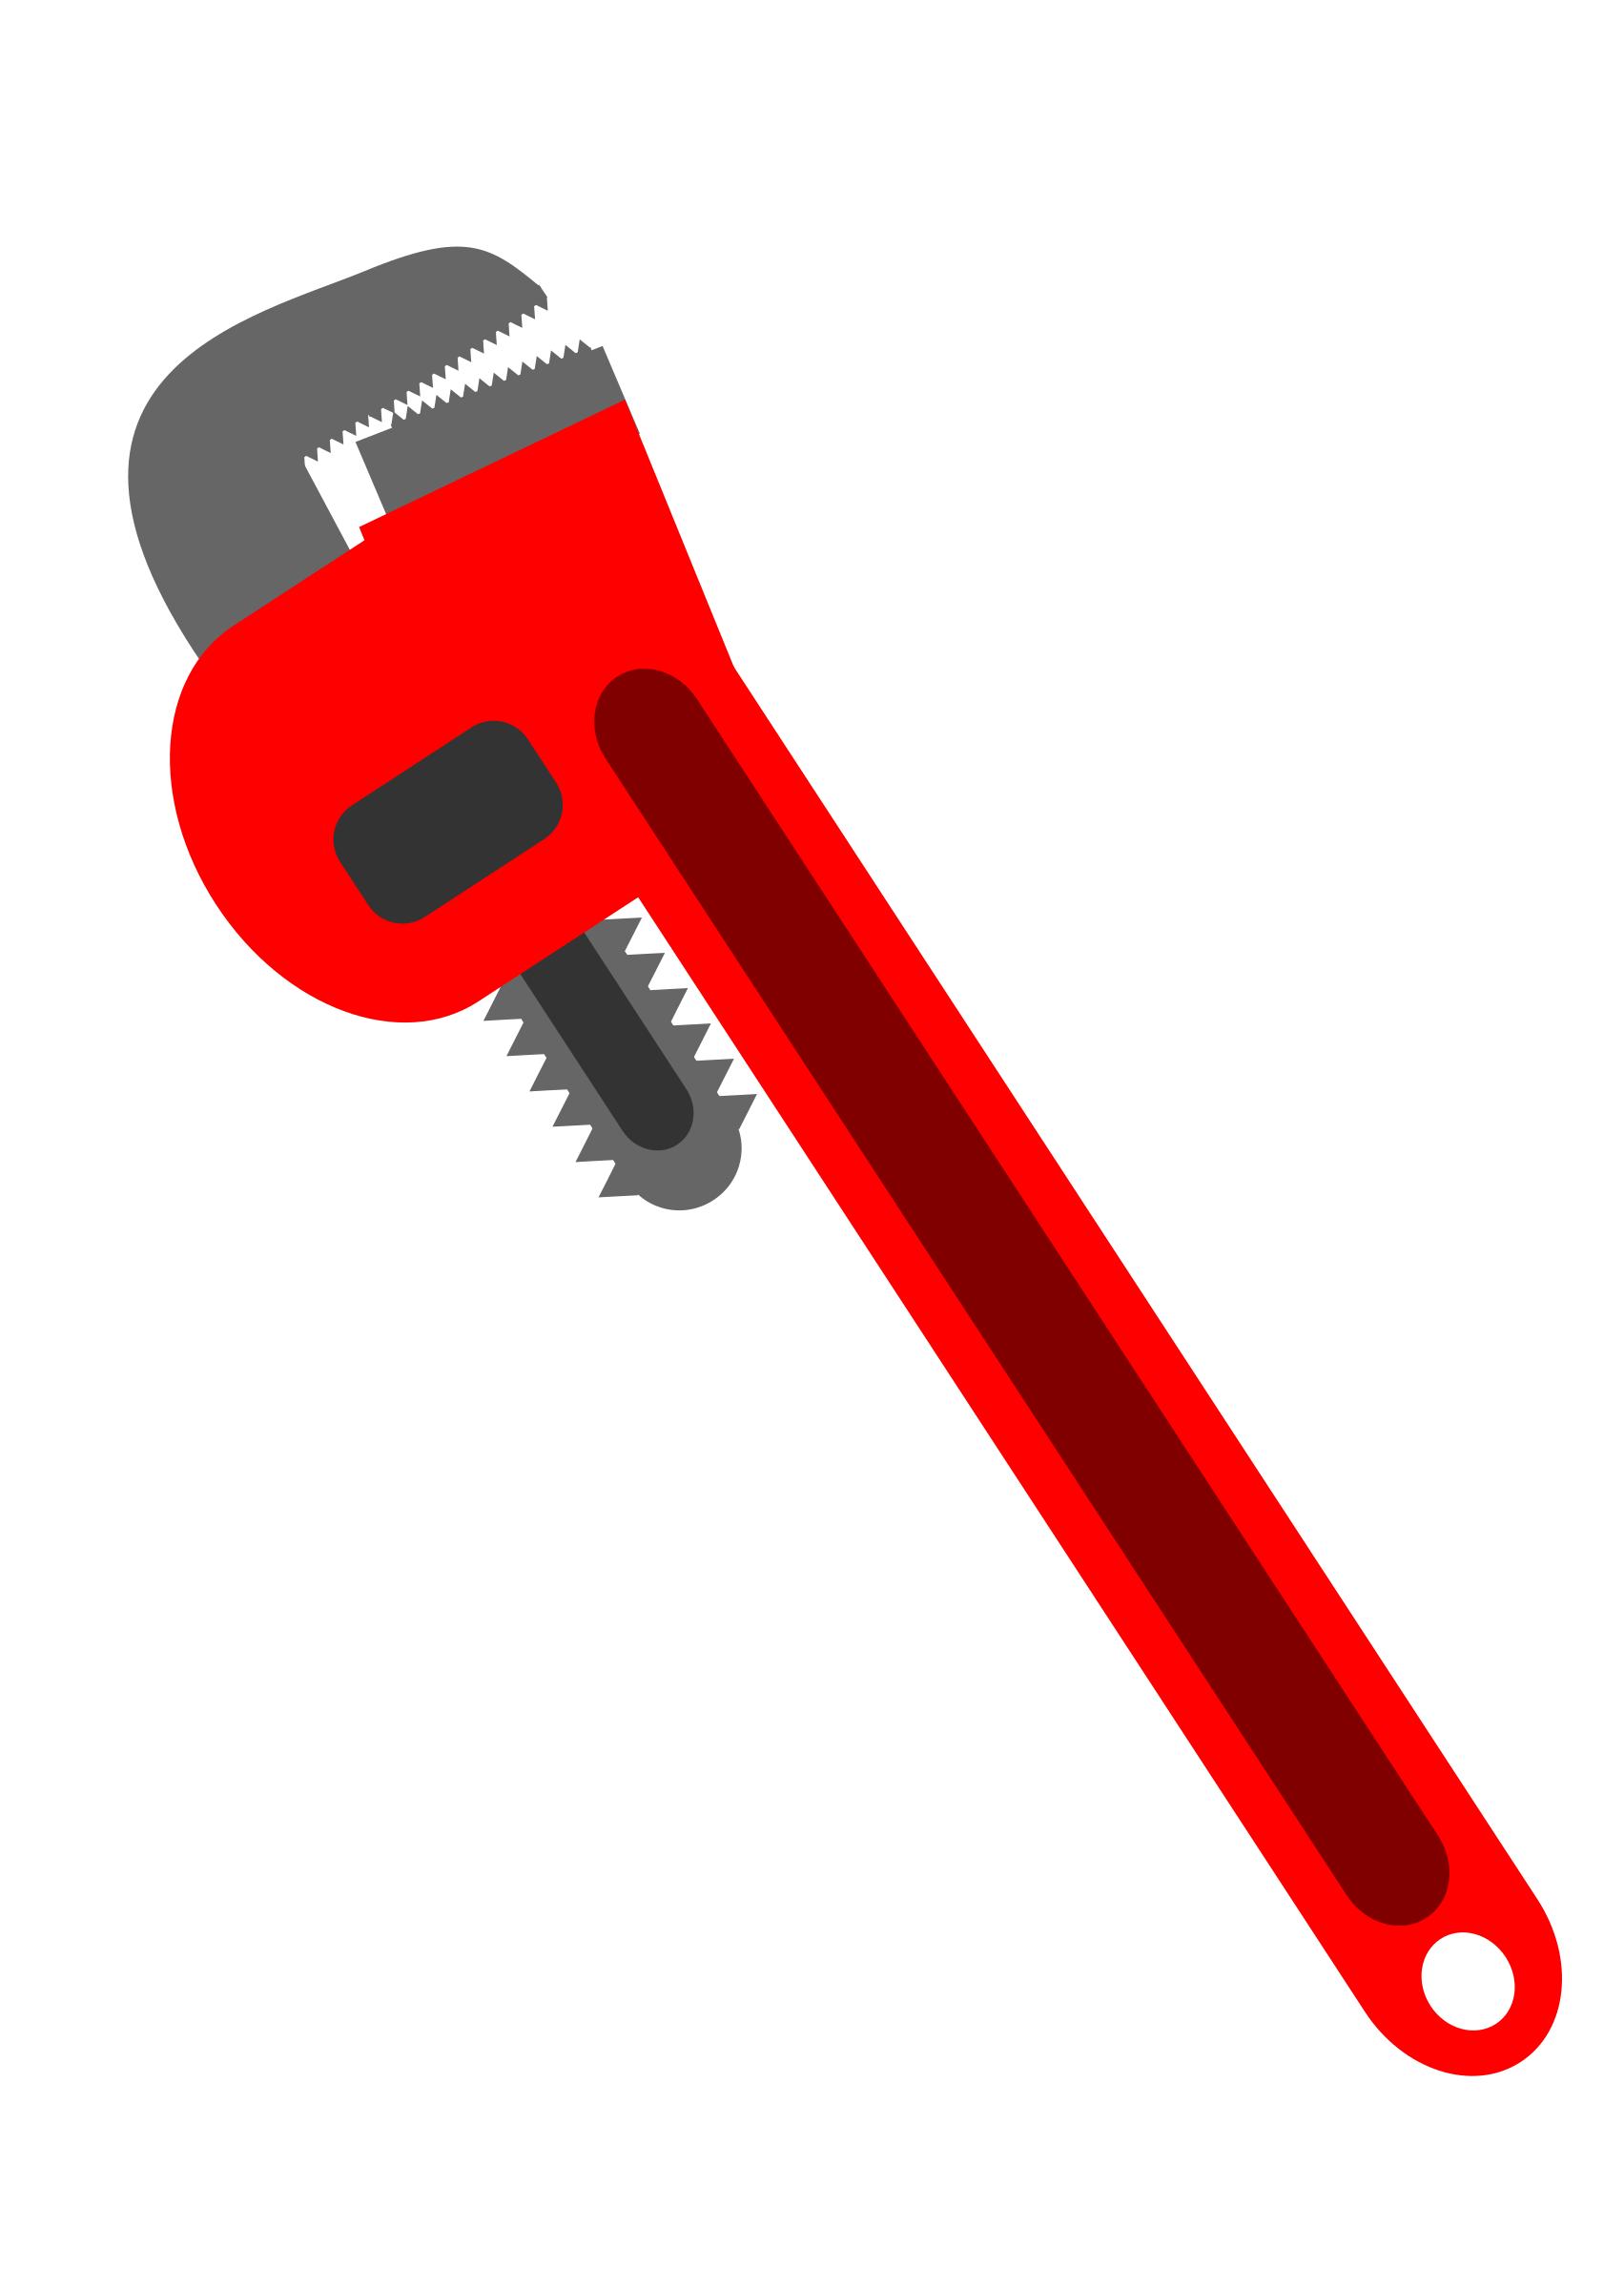 Plumbers Wrench png